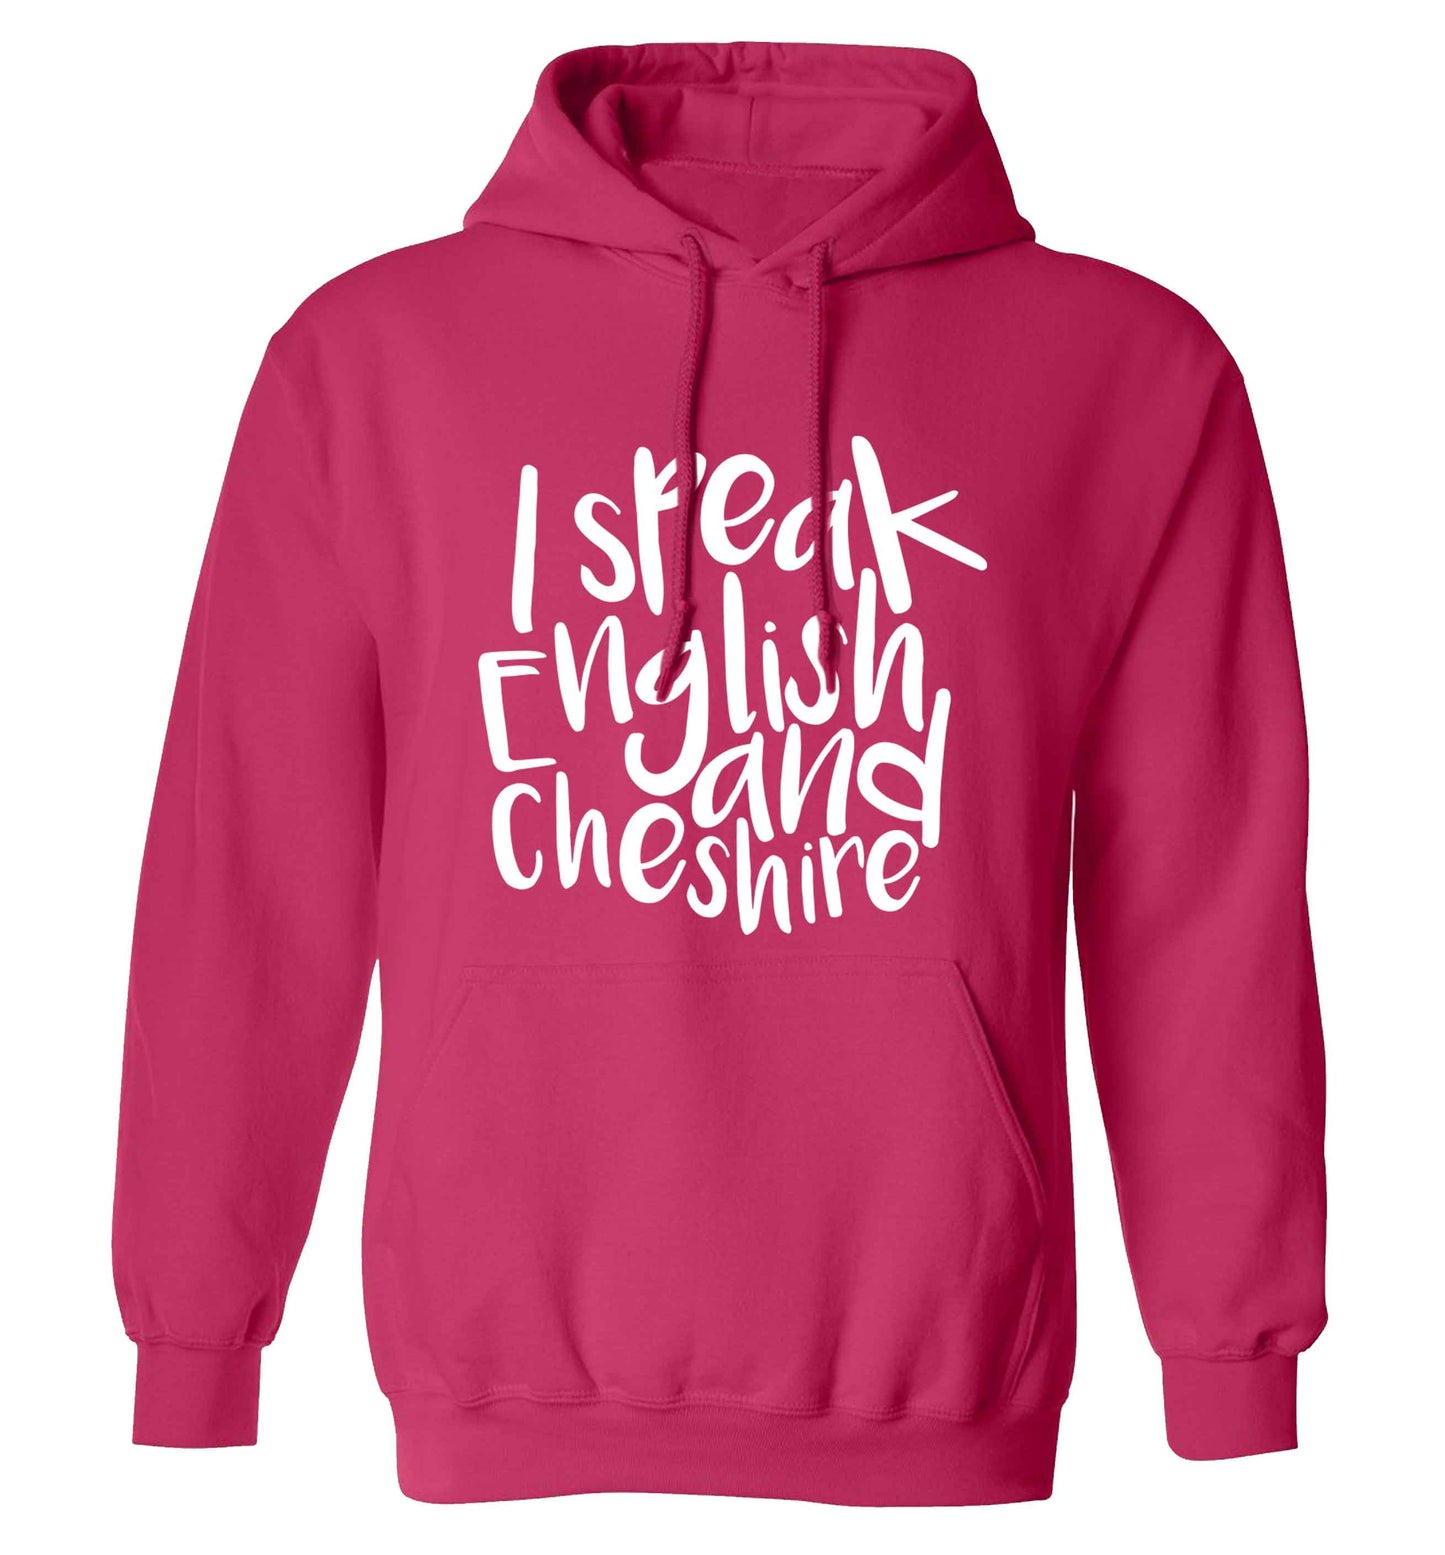 I speak English and Cheshire adults unisex pink hoodie 2XL